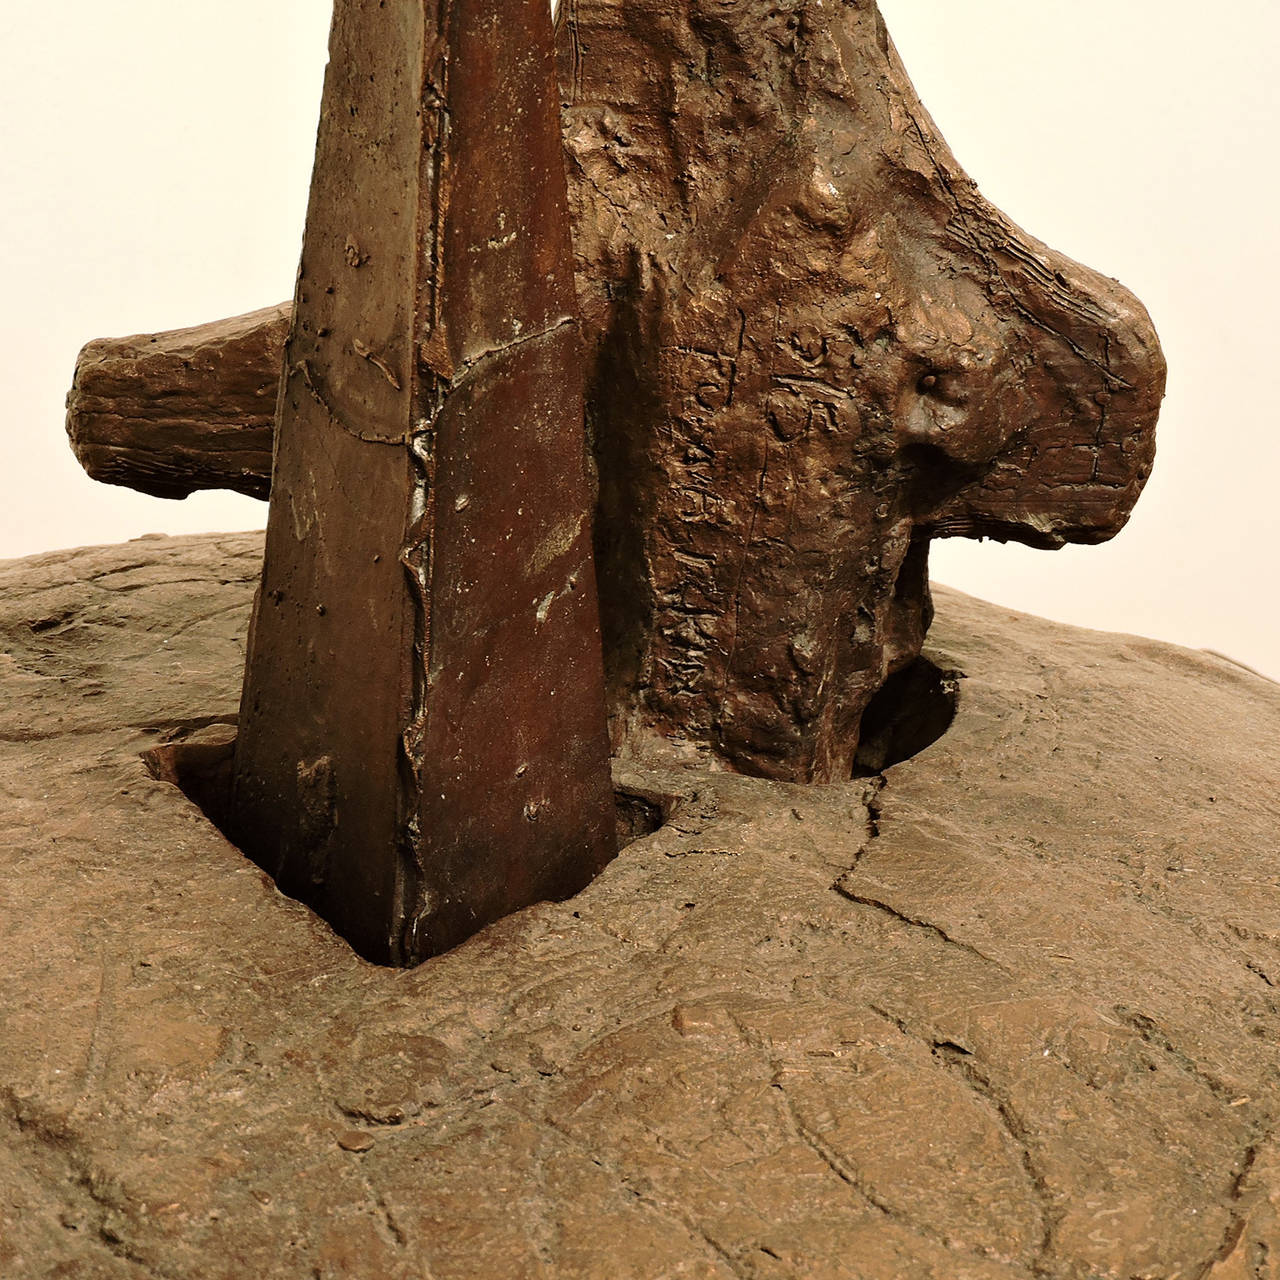 Igael Tumarkin (Israeli, b. 1933).
Untitled abstract sculpture.
Bronze, signed Tumarkin and numbered 5/5.
Dimensions: 17 x 18 inches.